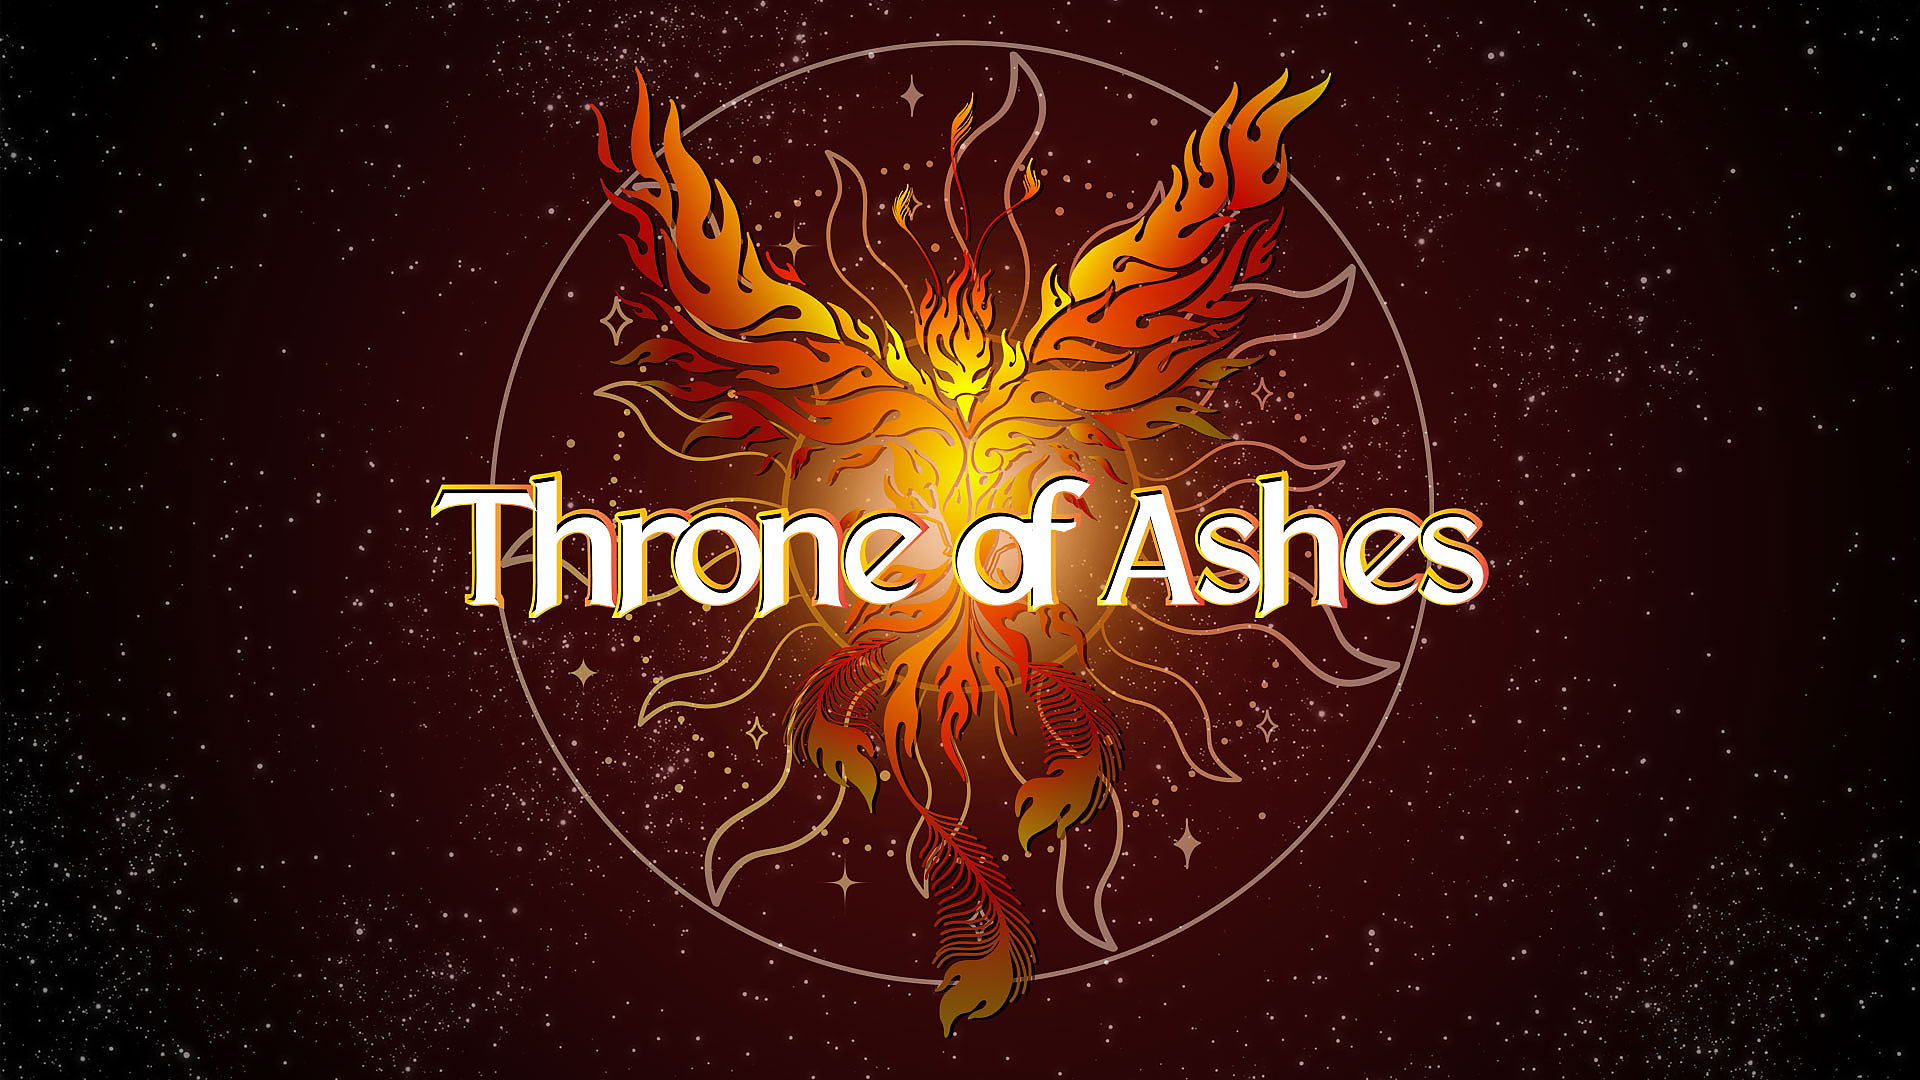 Throne of Ashes by 13Leagues